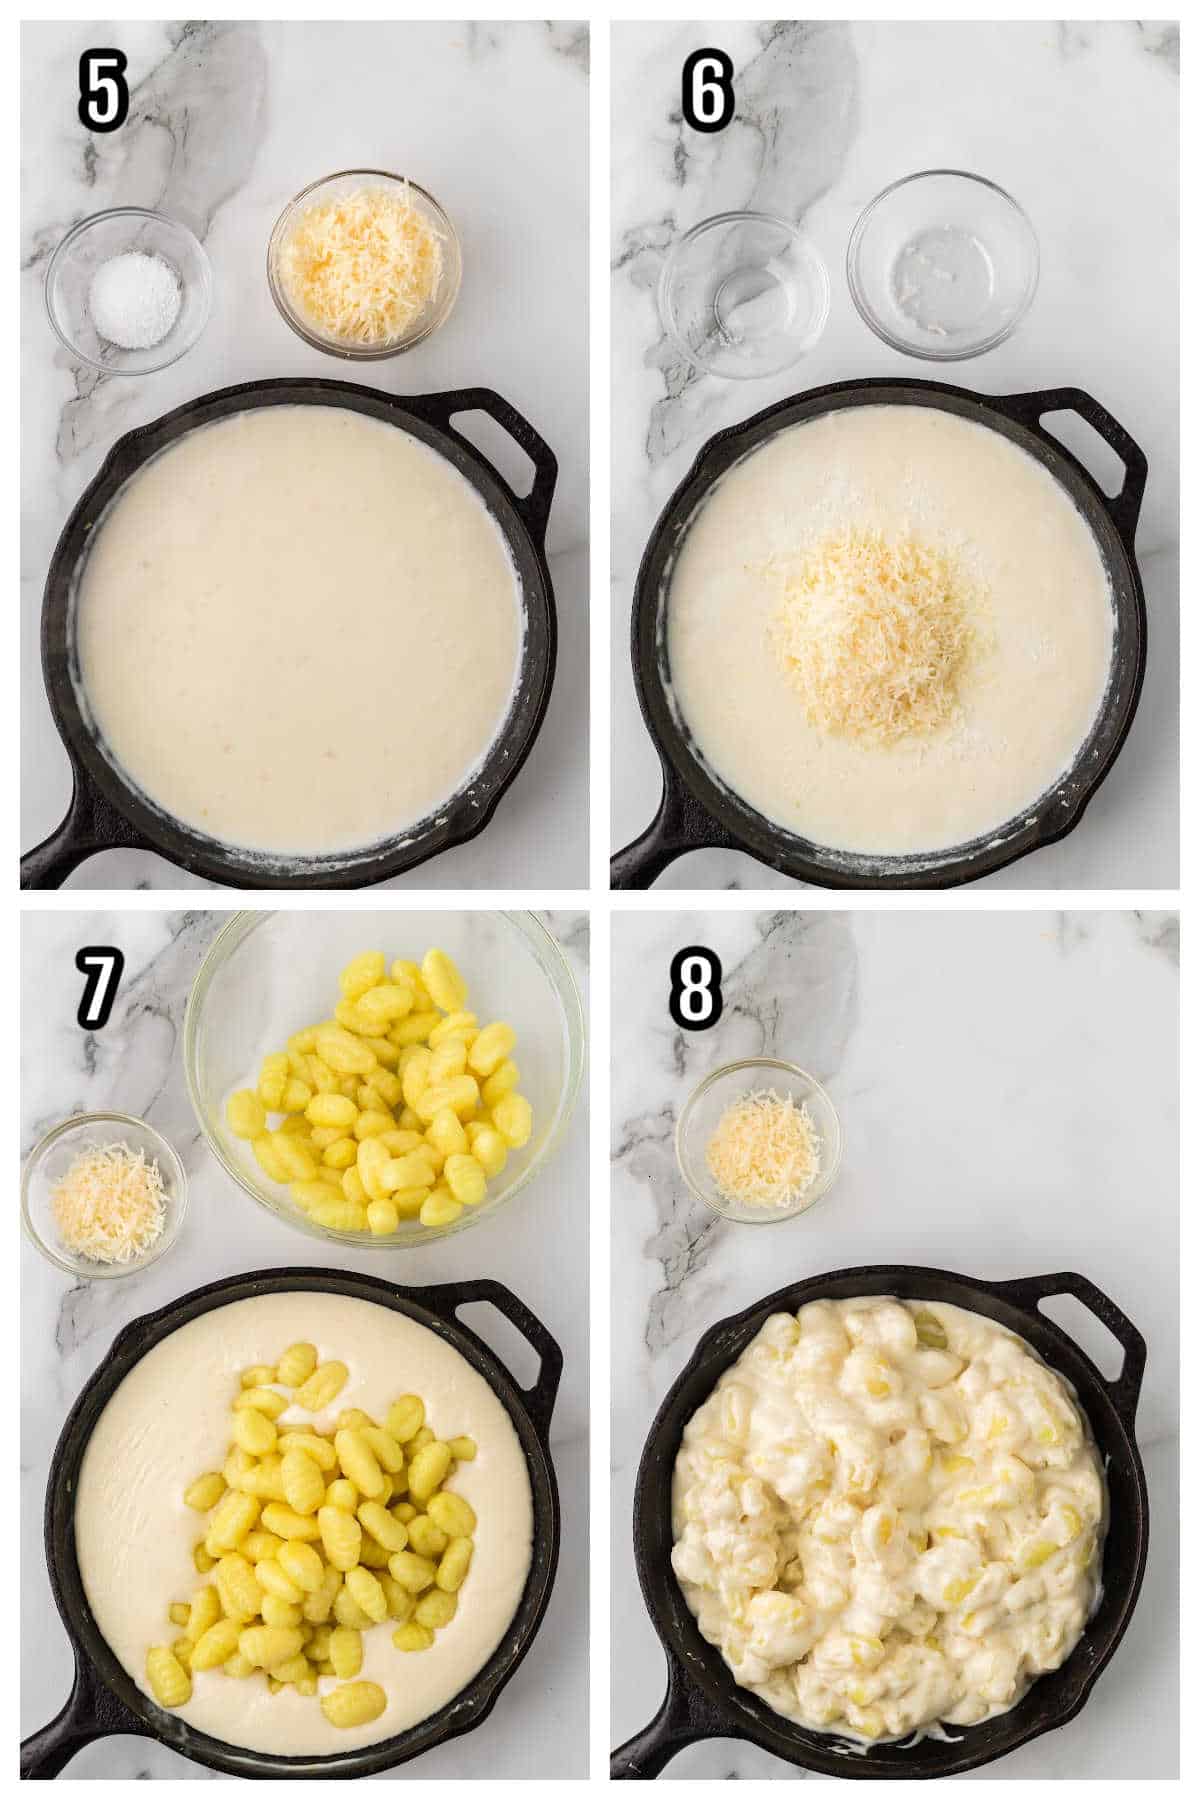 The second collage features steps five through eight of the potato gnocchi recipe baked in a Parmesan sauce. 